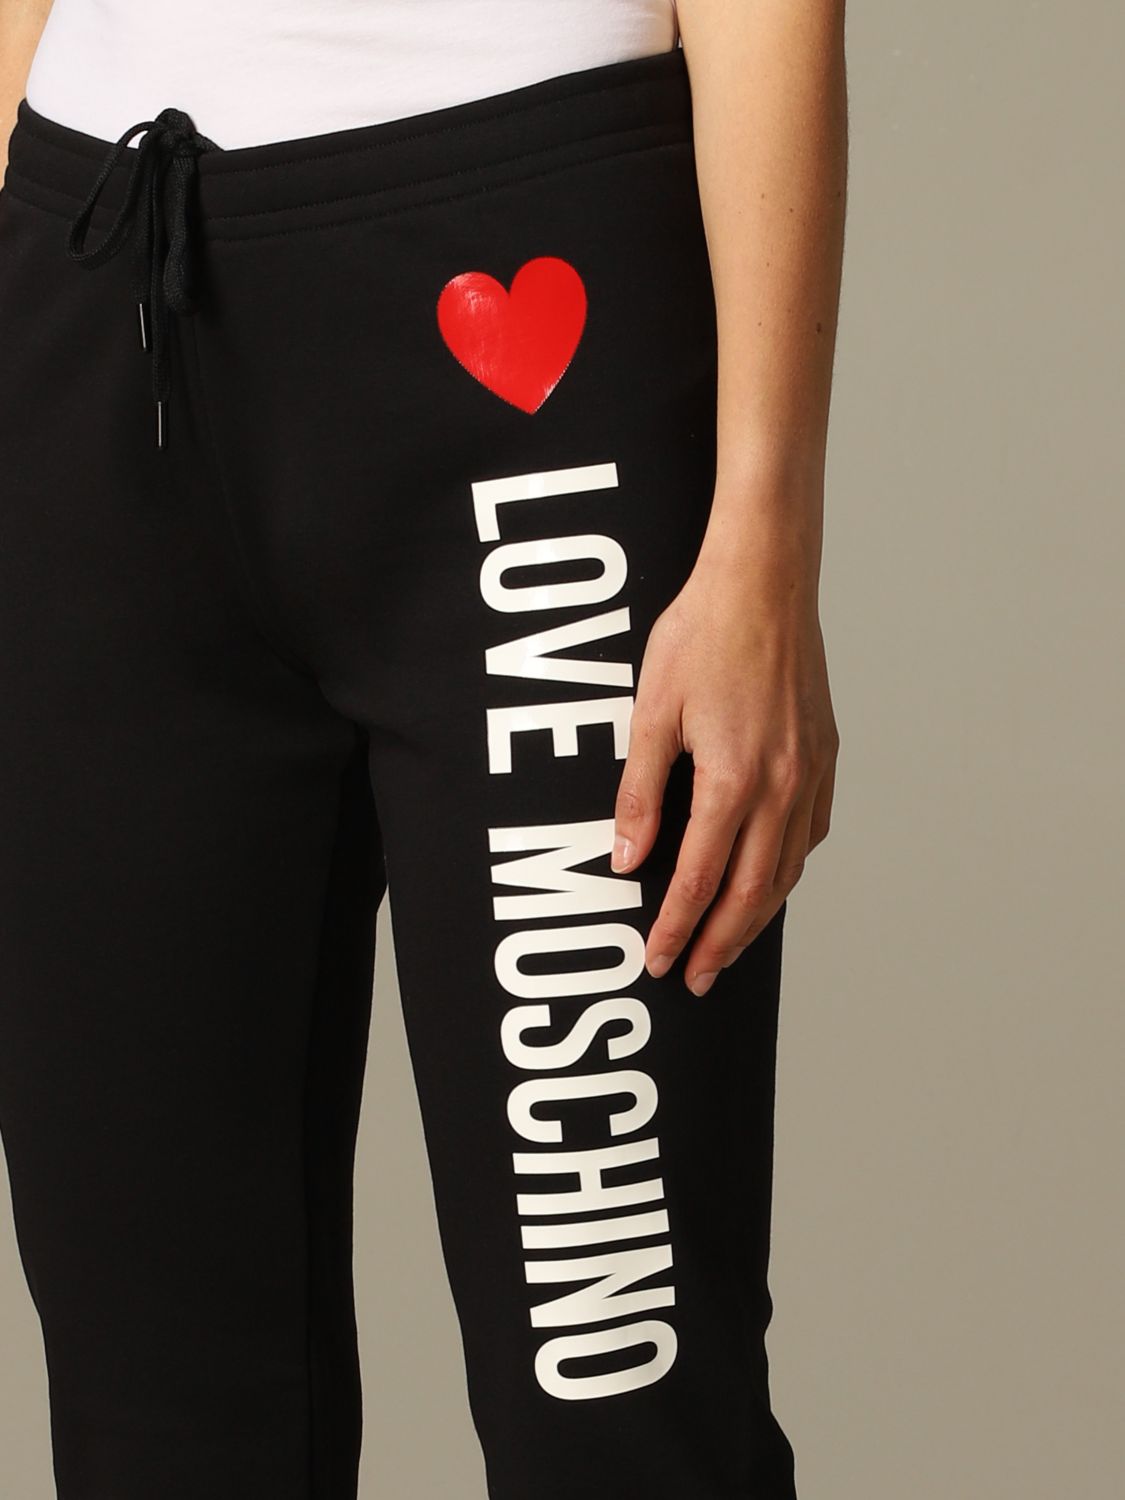 Love Moschino Outlet: Pants women 